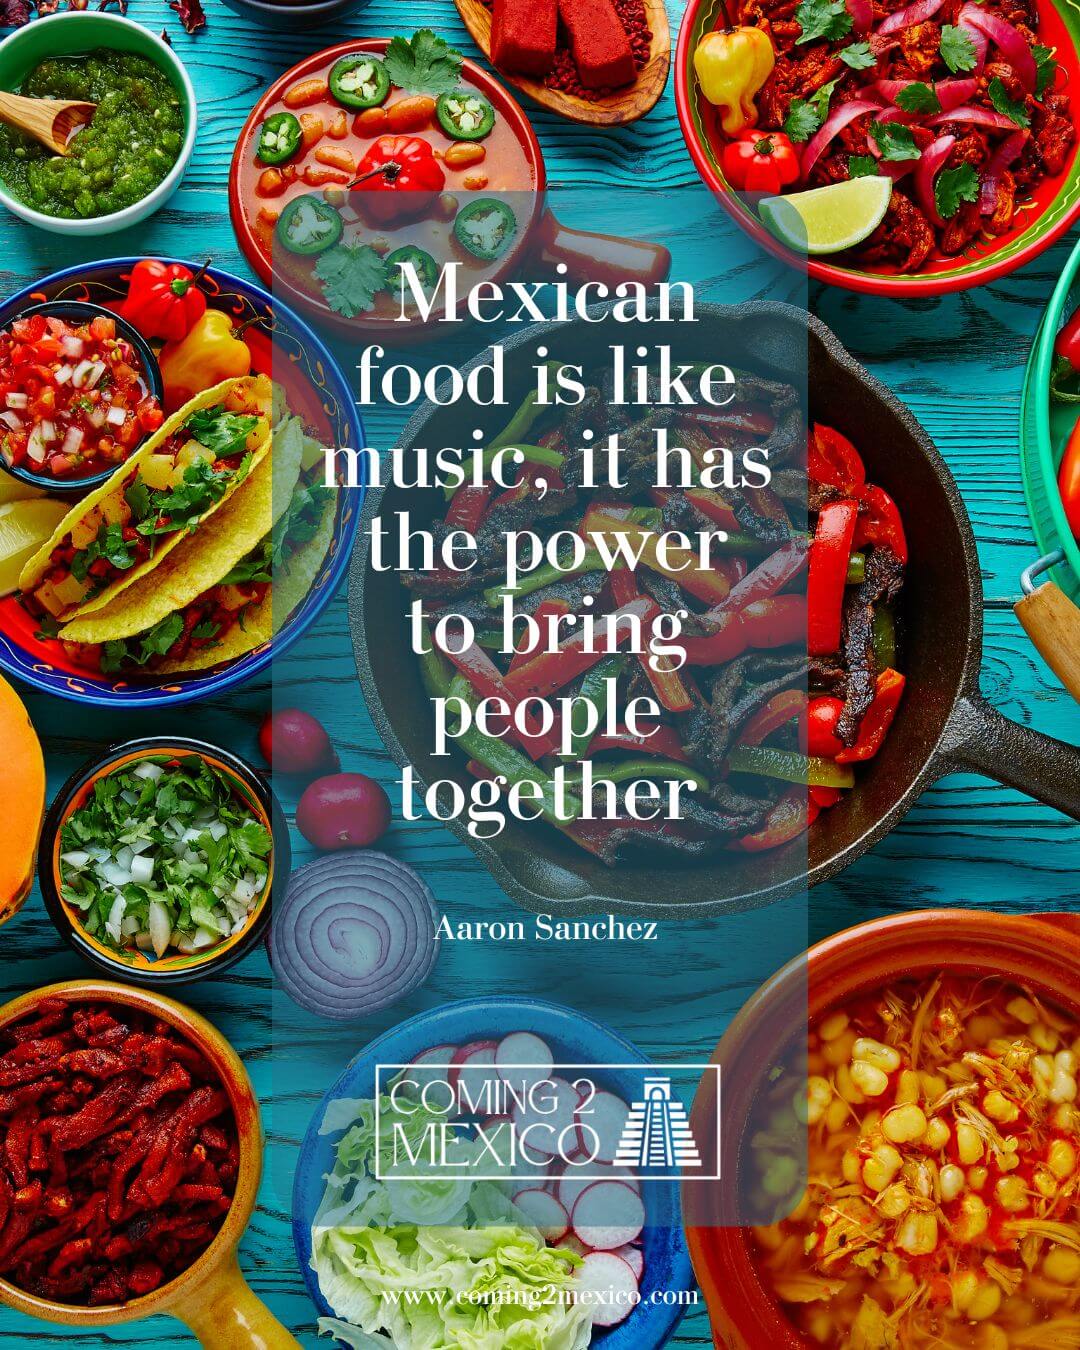 “Mexican food is like music, it has the power to bring people together.” – Aarón Sánchez